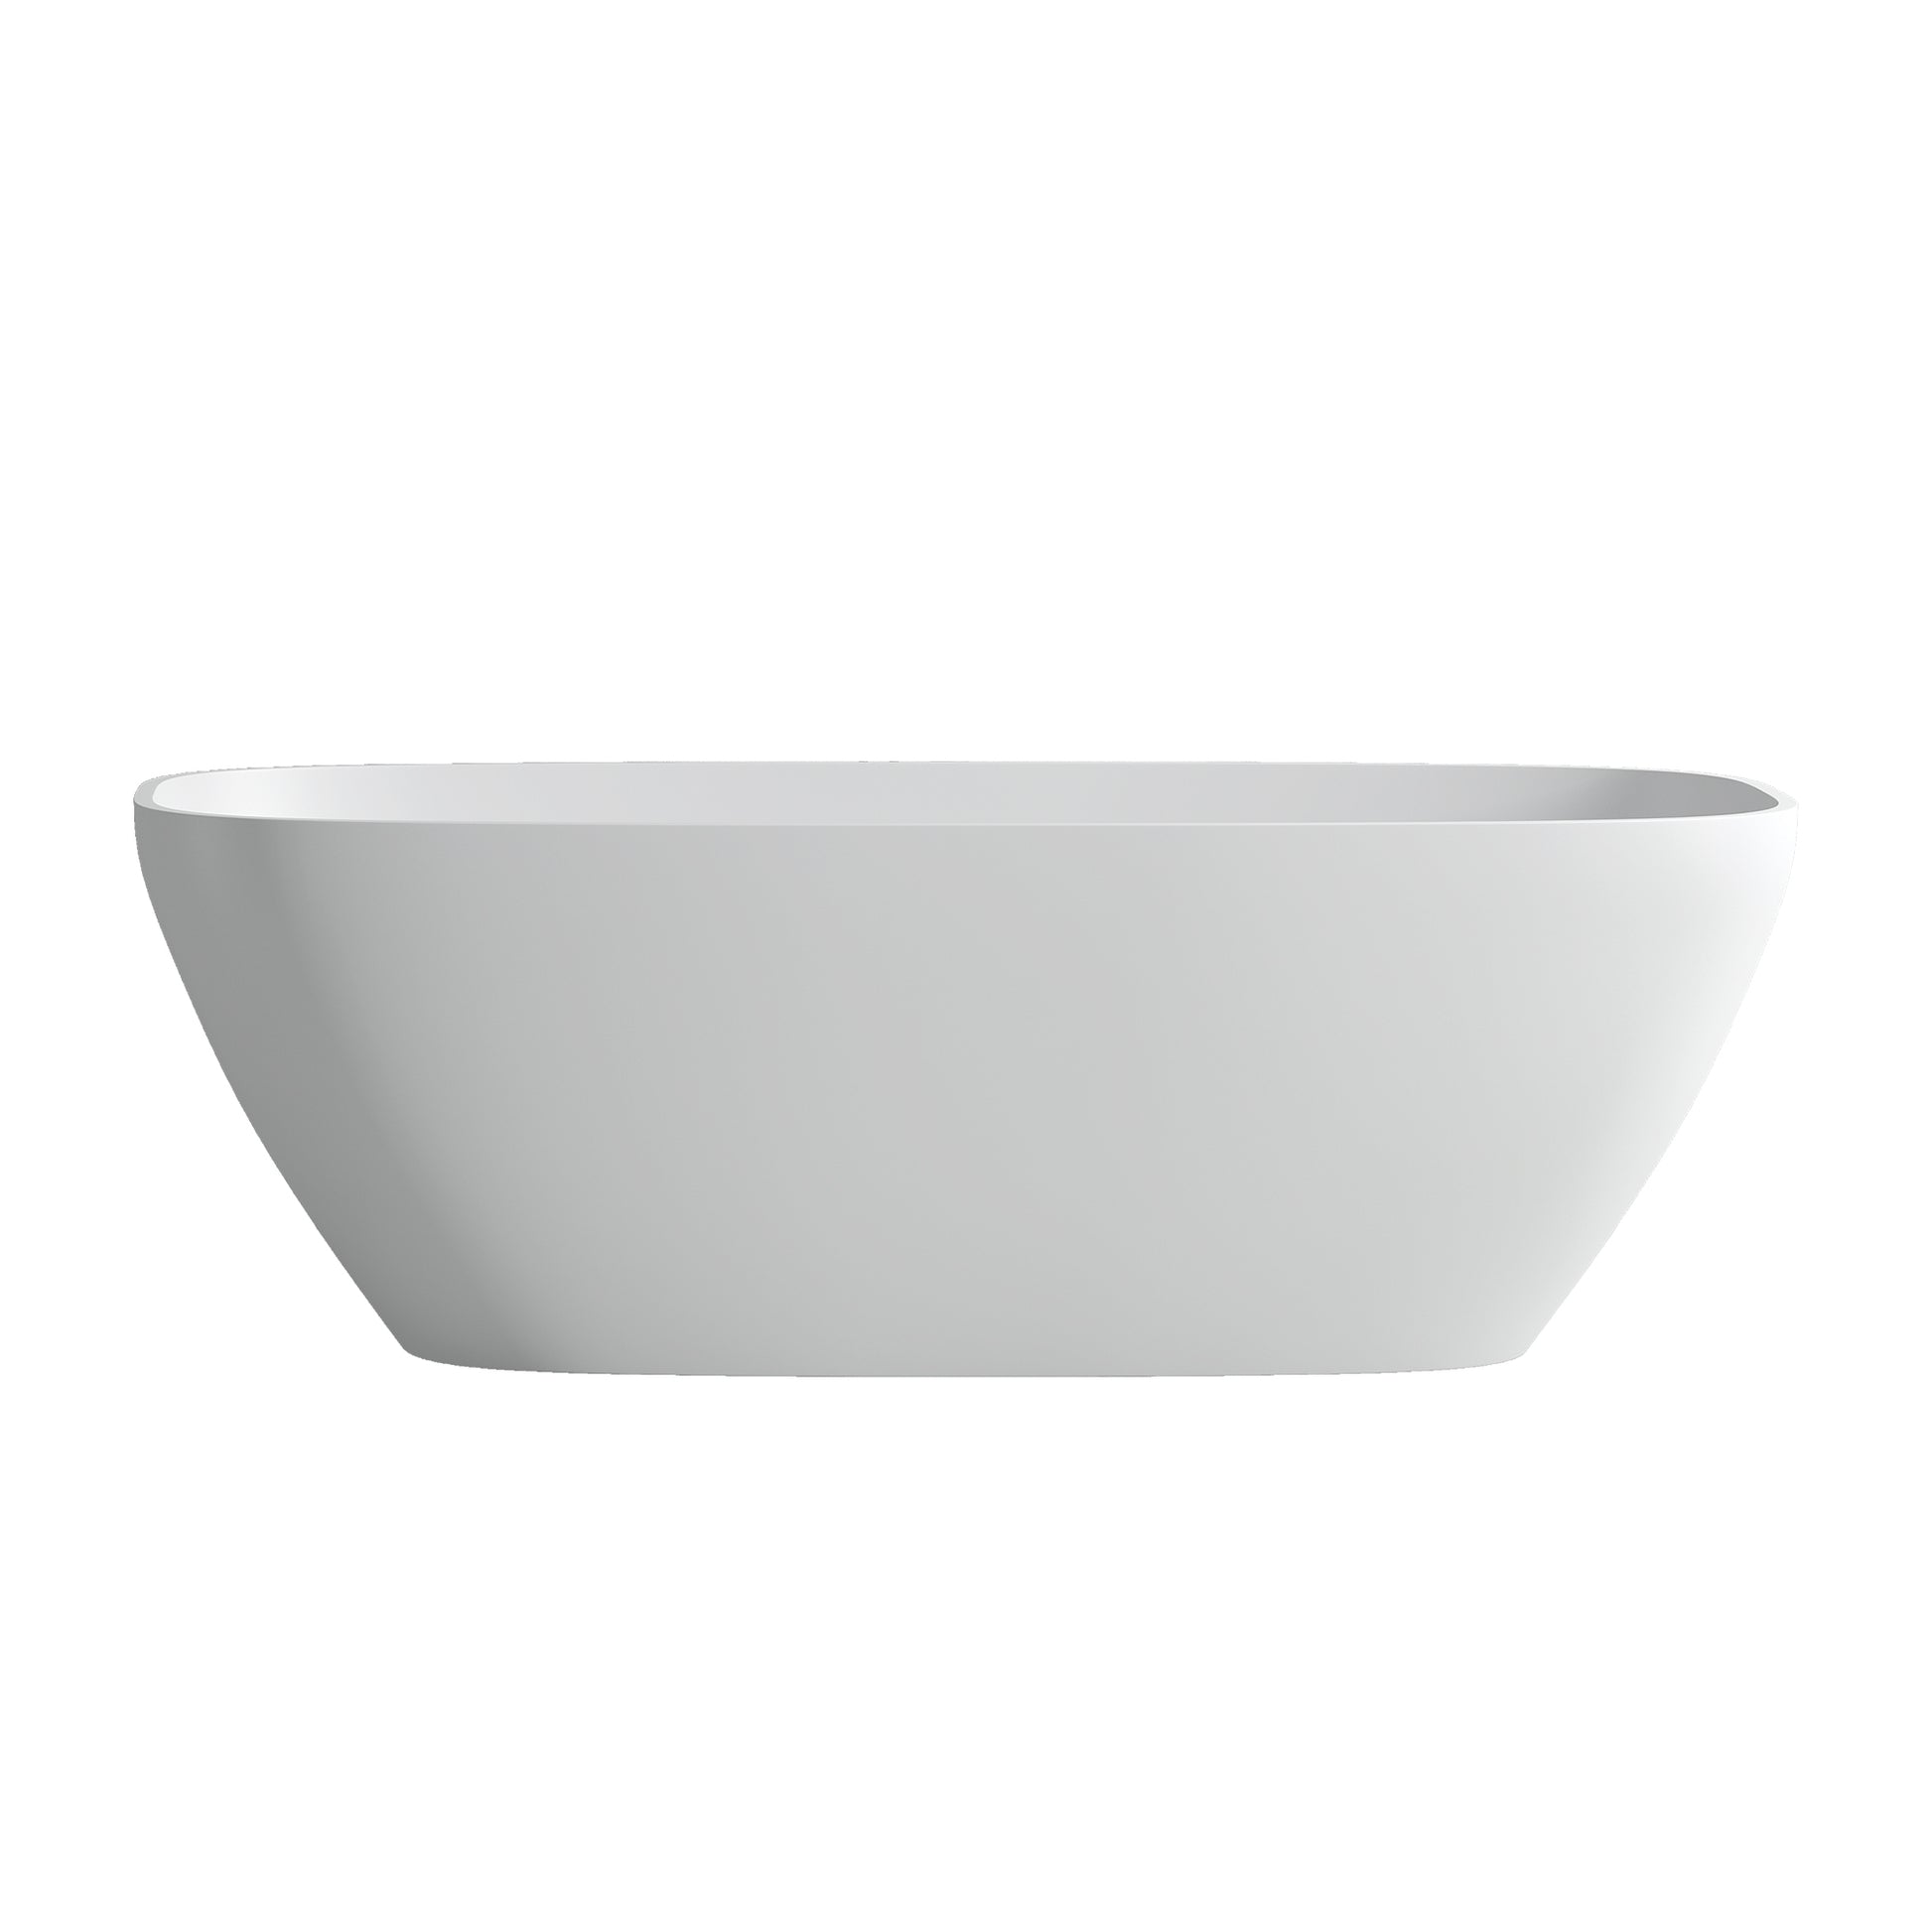 1700mm solid surface bathtub for bathroom white-solid surface